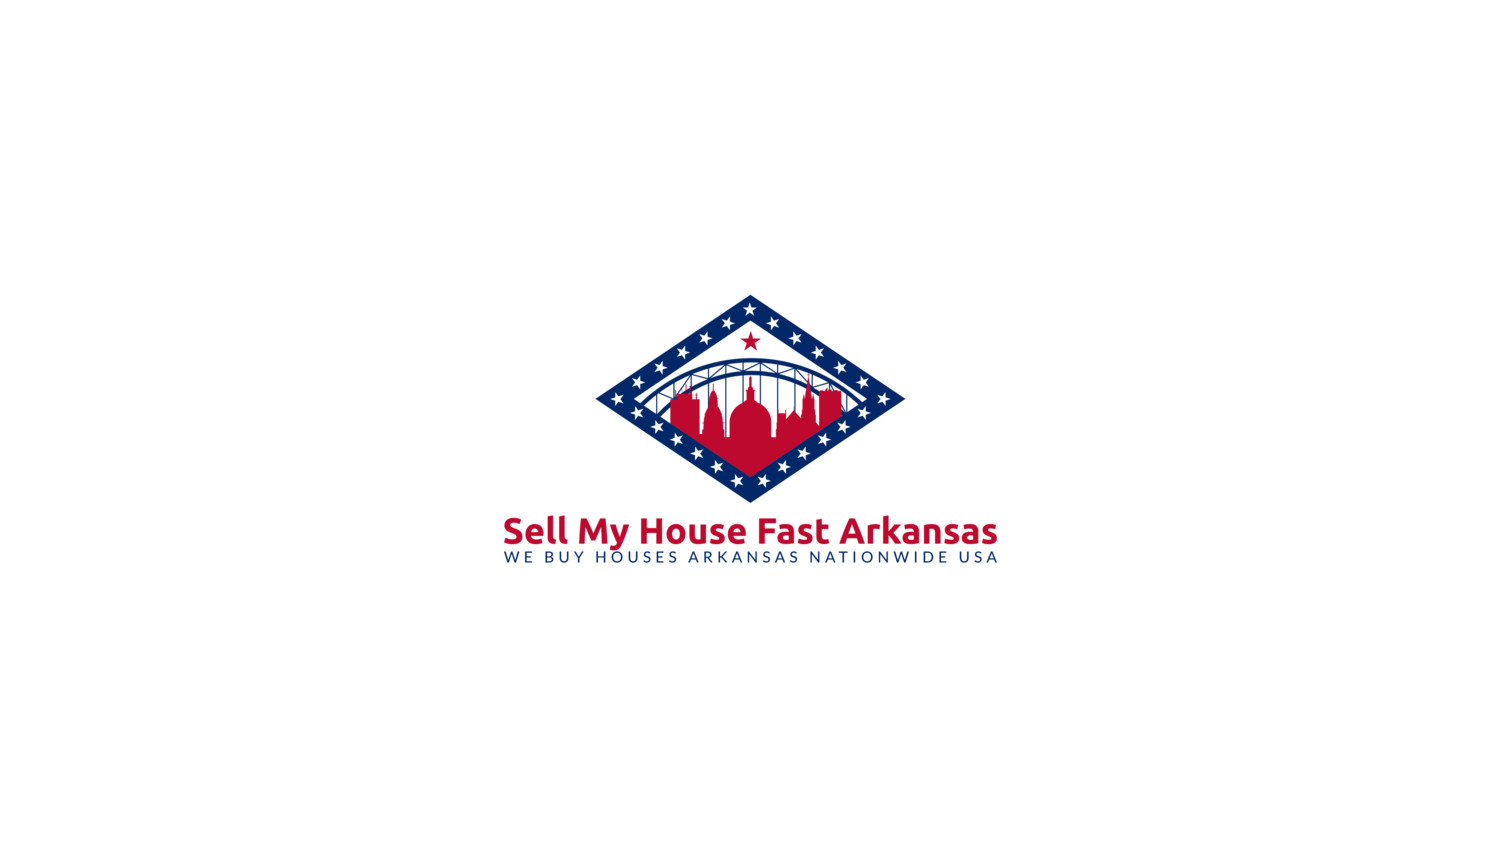 Sell My House Fast Arkansas &amp; Nationwide USA | We Buy Houses Arkansas | Sell House Cash Arkansas | Cash for Houses AR | We Buy Houses Near Me